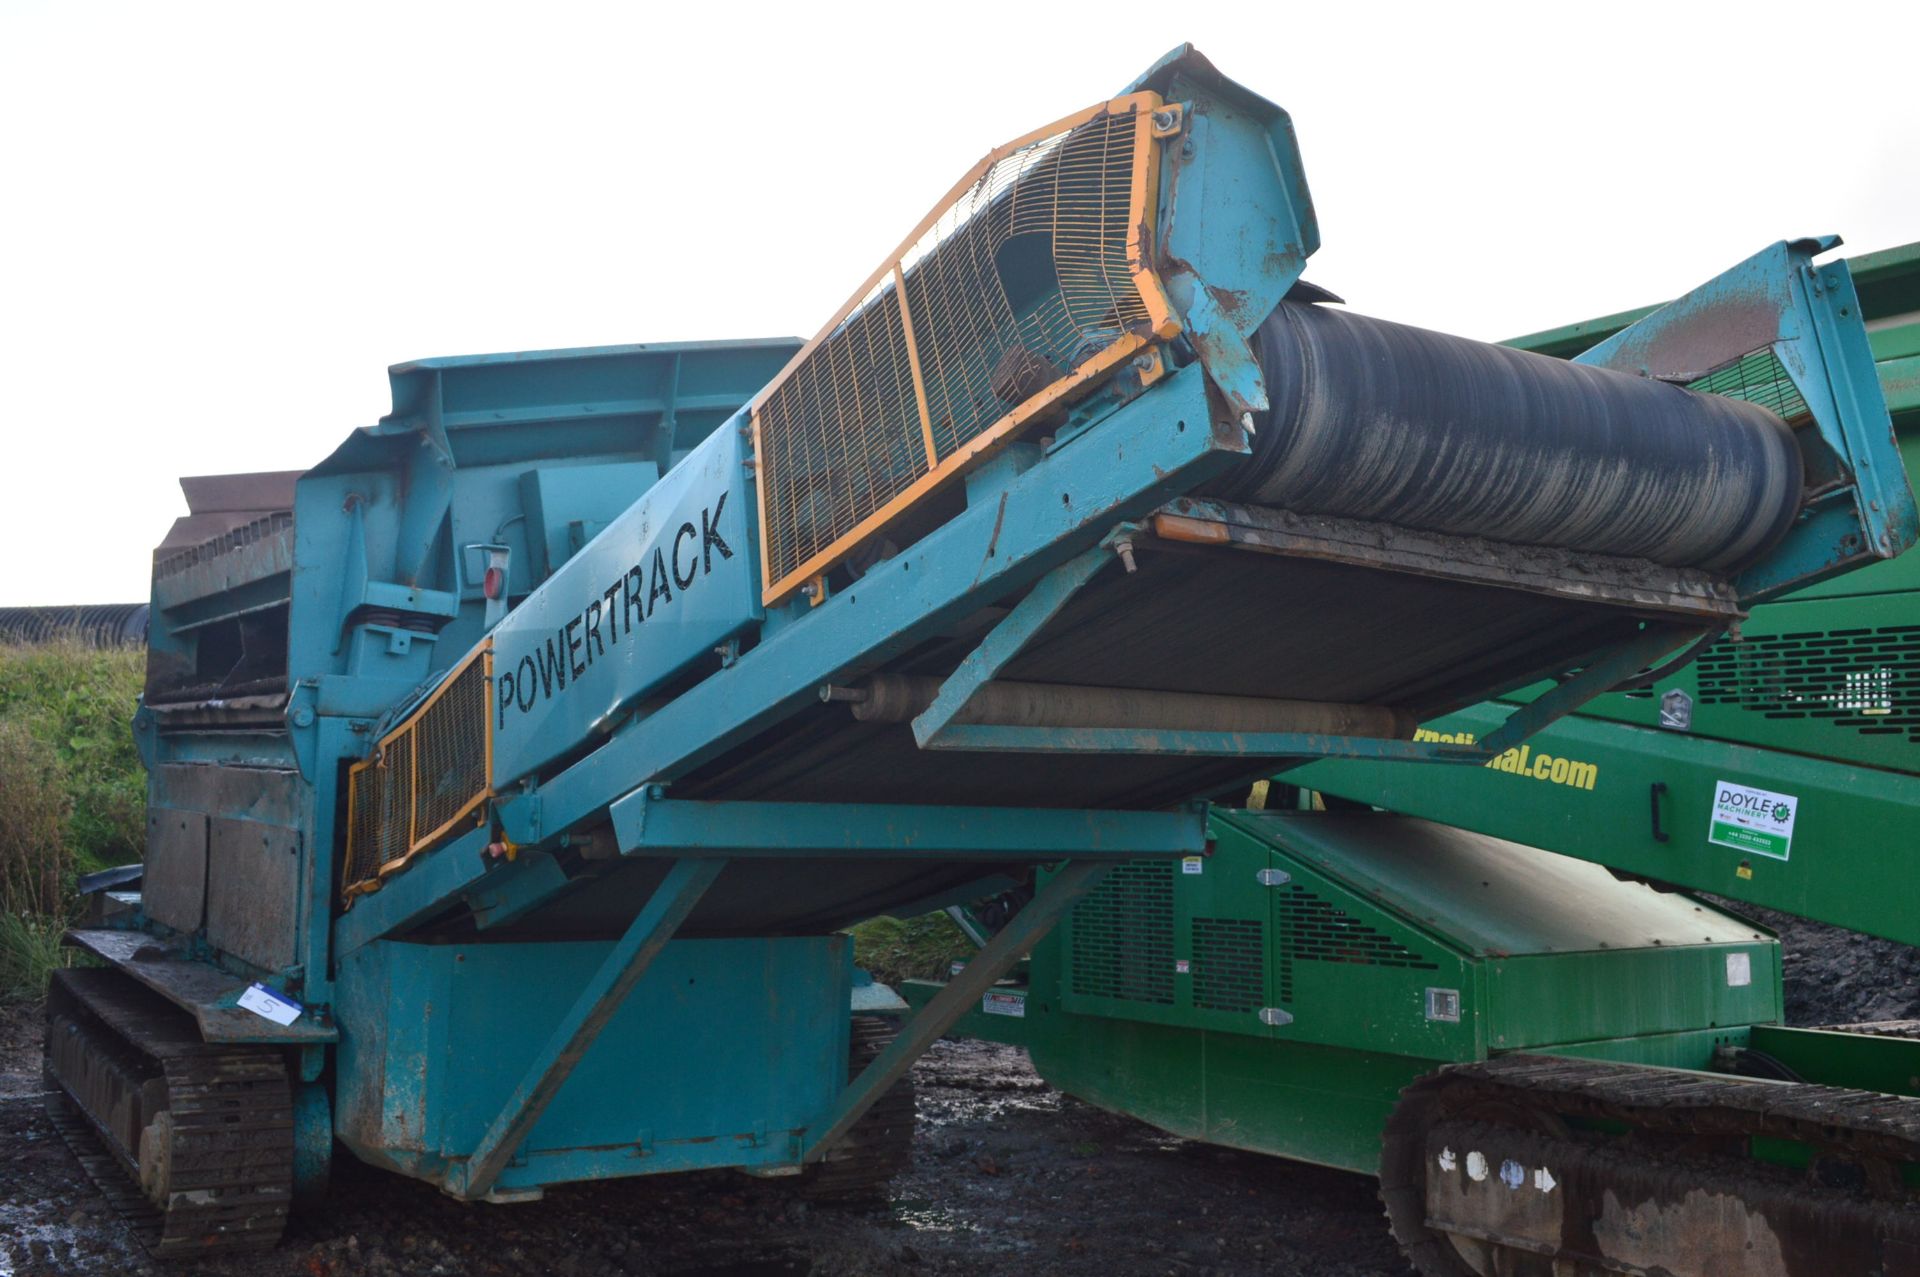 Powerscreen POWER TRACK MOUNTED AGGREGATE SCREEN, serial no. 72 15 651, indicated hours 8429 (at